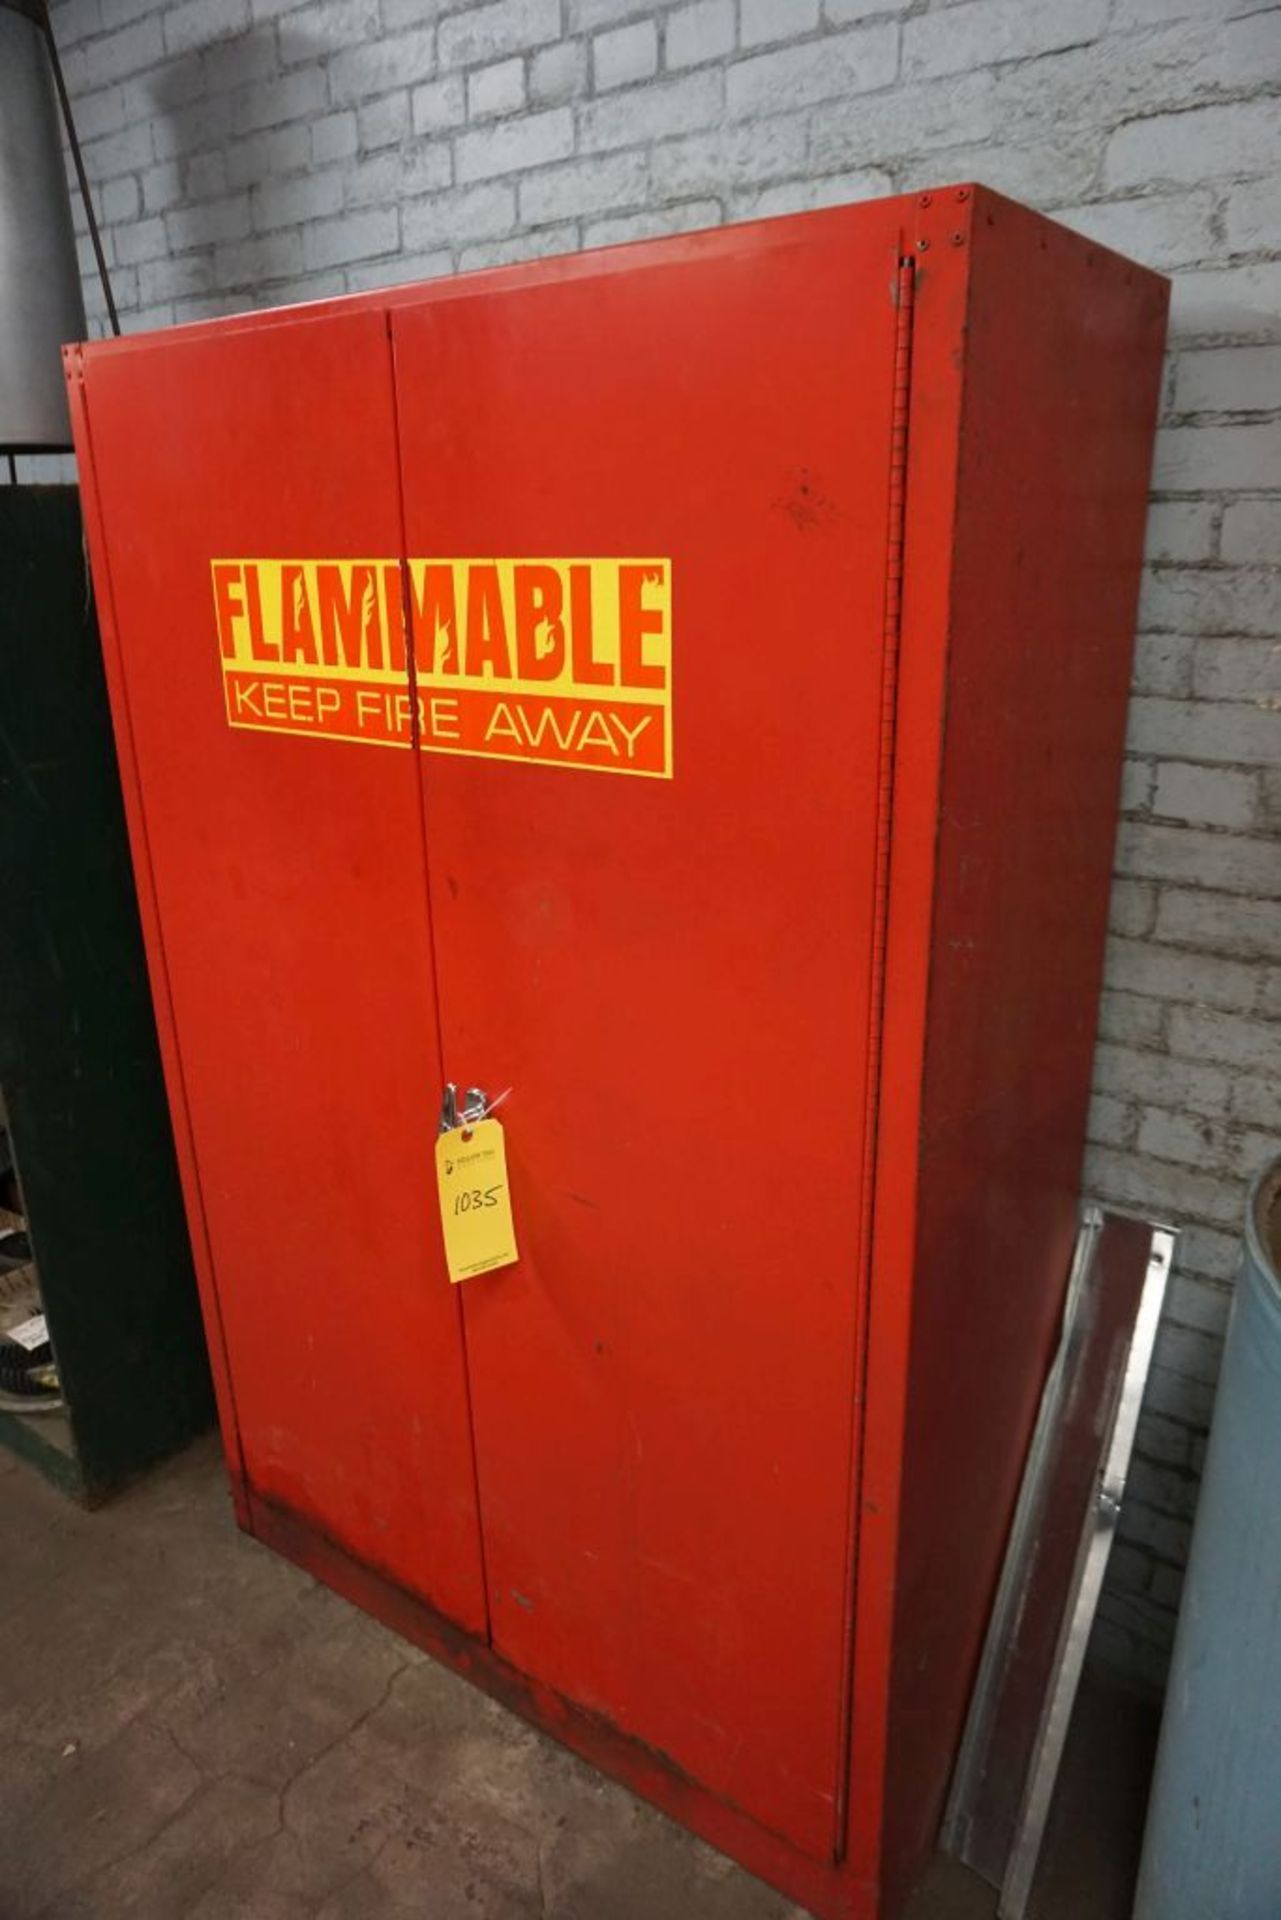 Flammable Storage Cabinet|Lot Tag: 1035 - Image 2 of 3